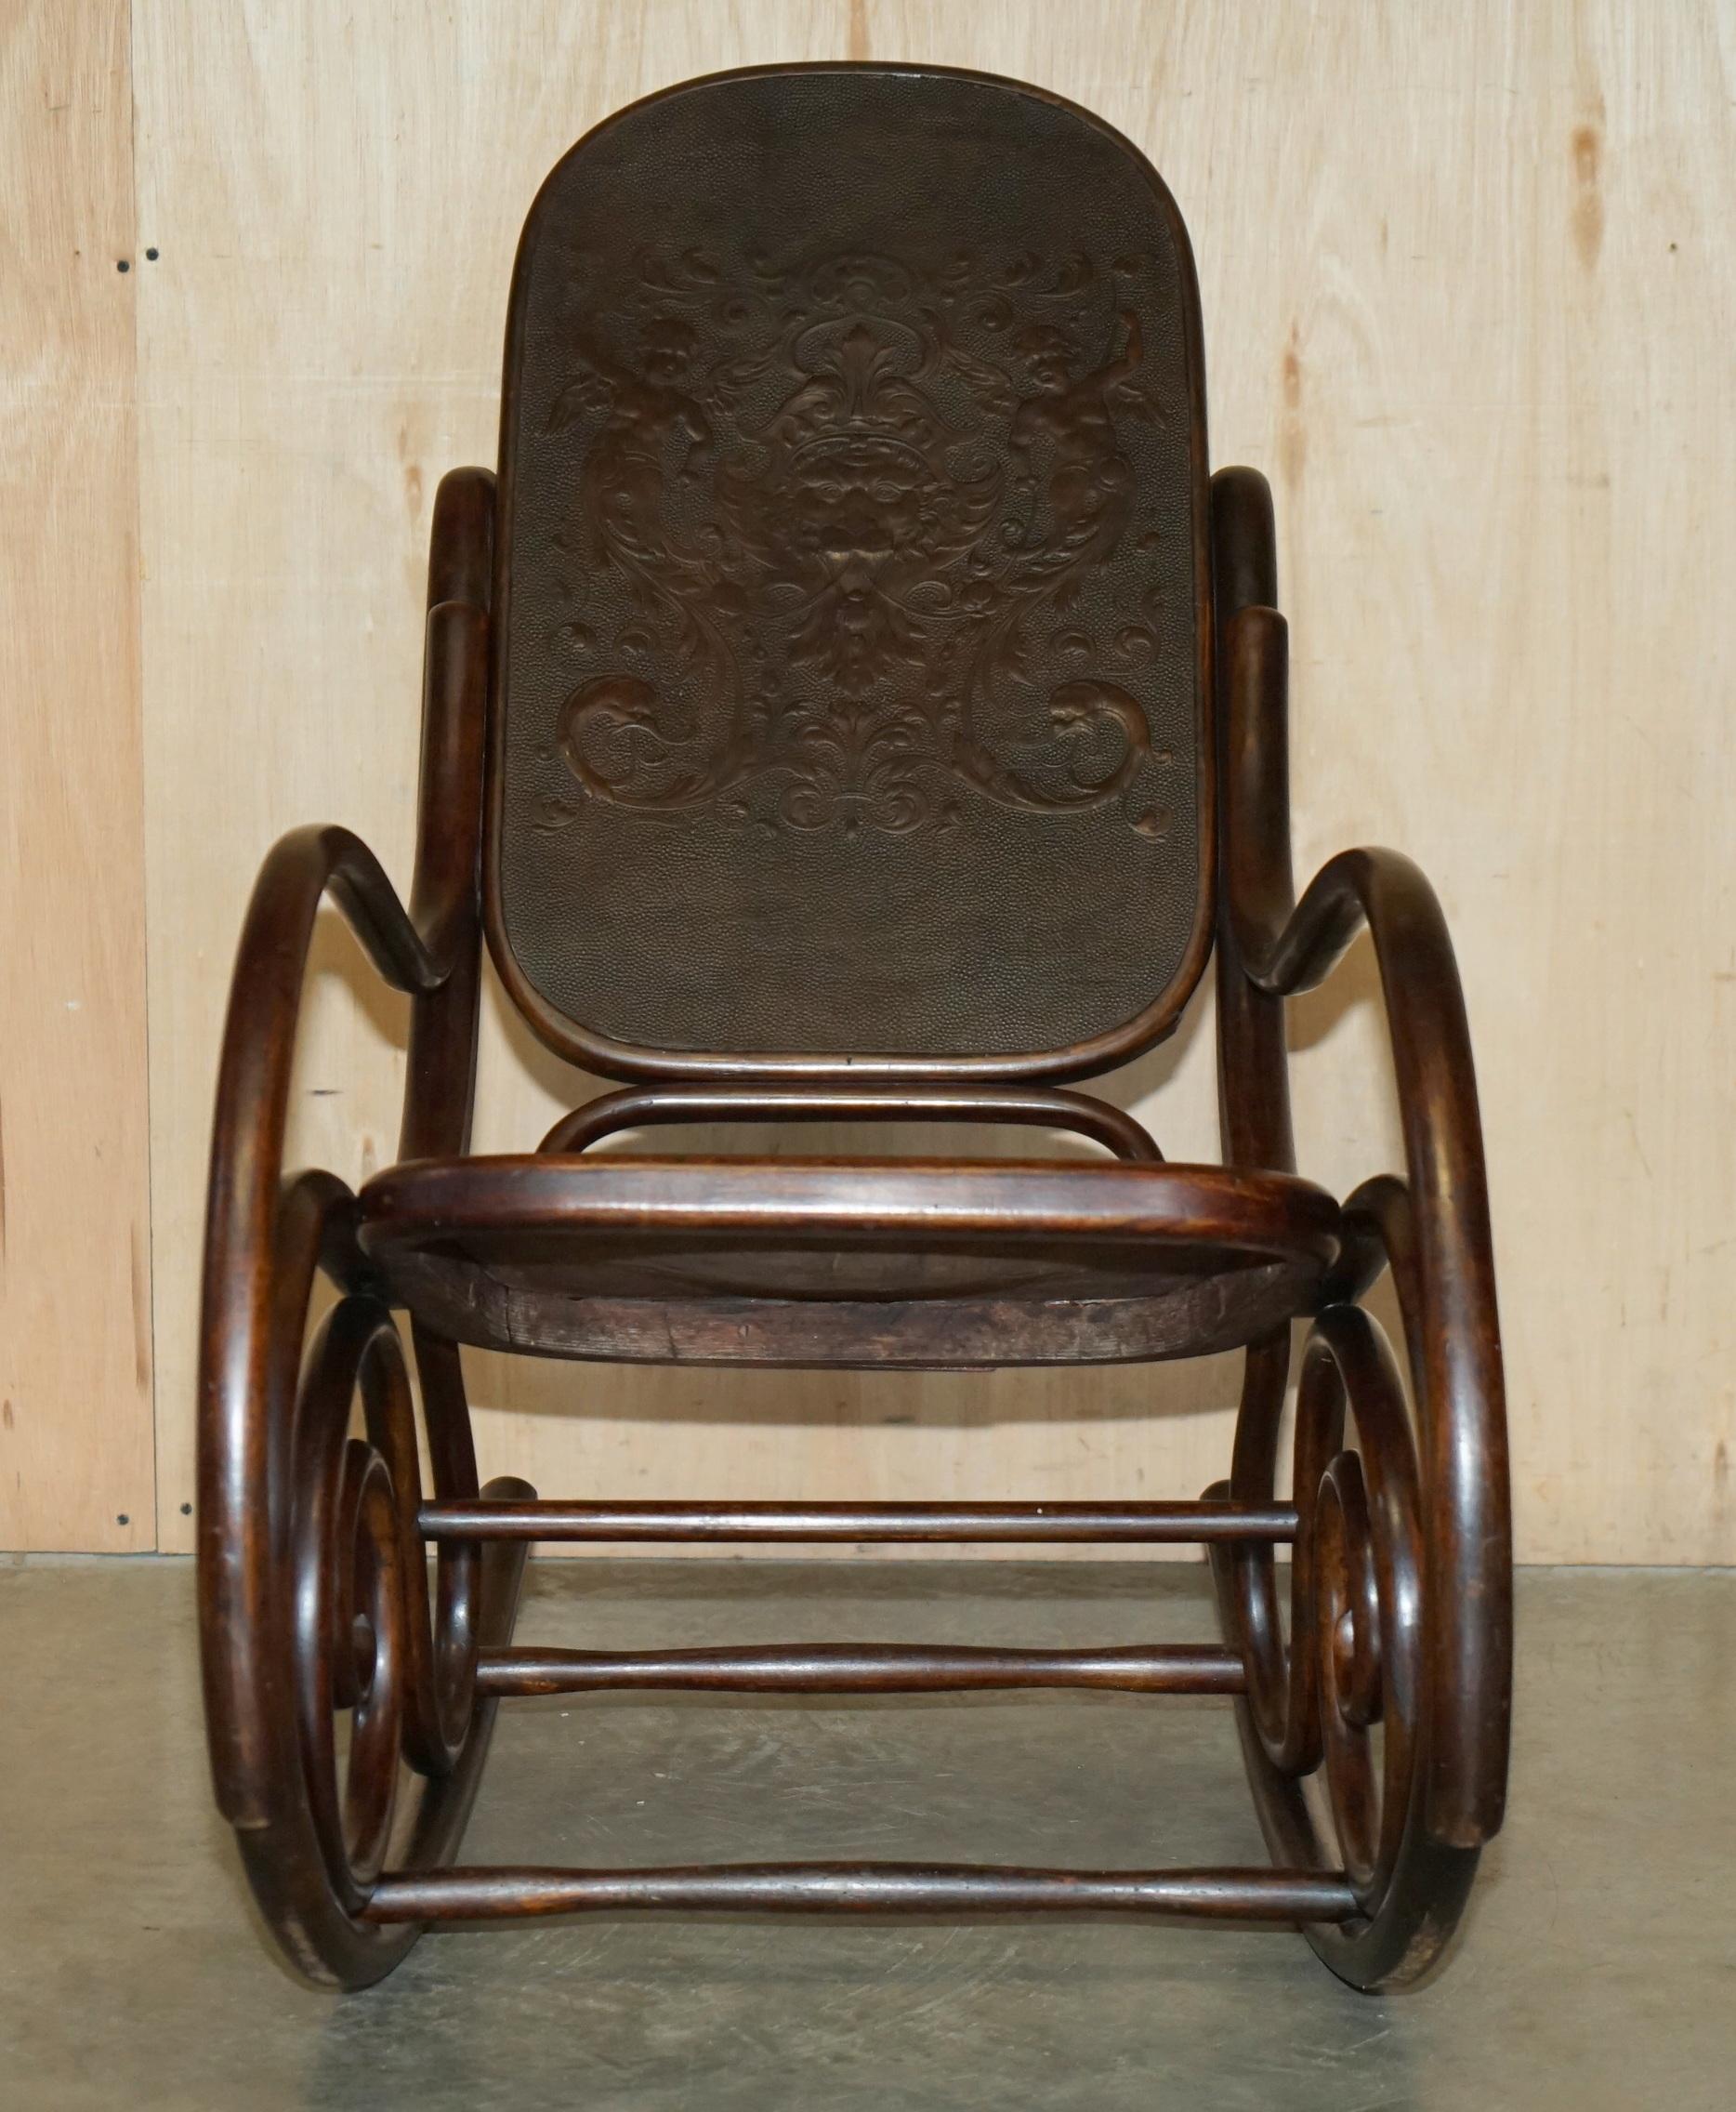 Victorian EXQUISITE ViCTORIAN THONET ROCKING CHAIR WITH CHERUB CARVED BACK & SEAT PANELS For Sale